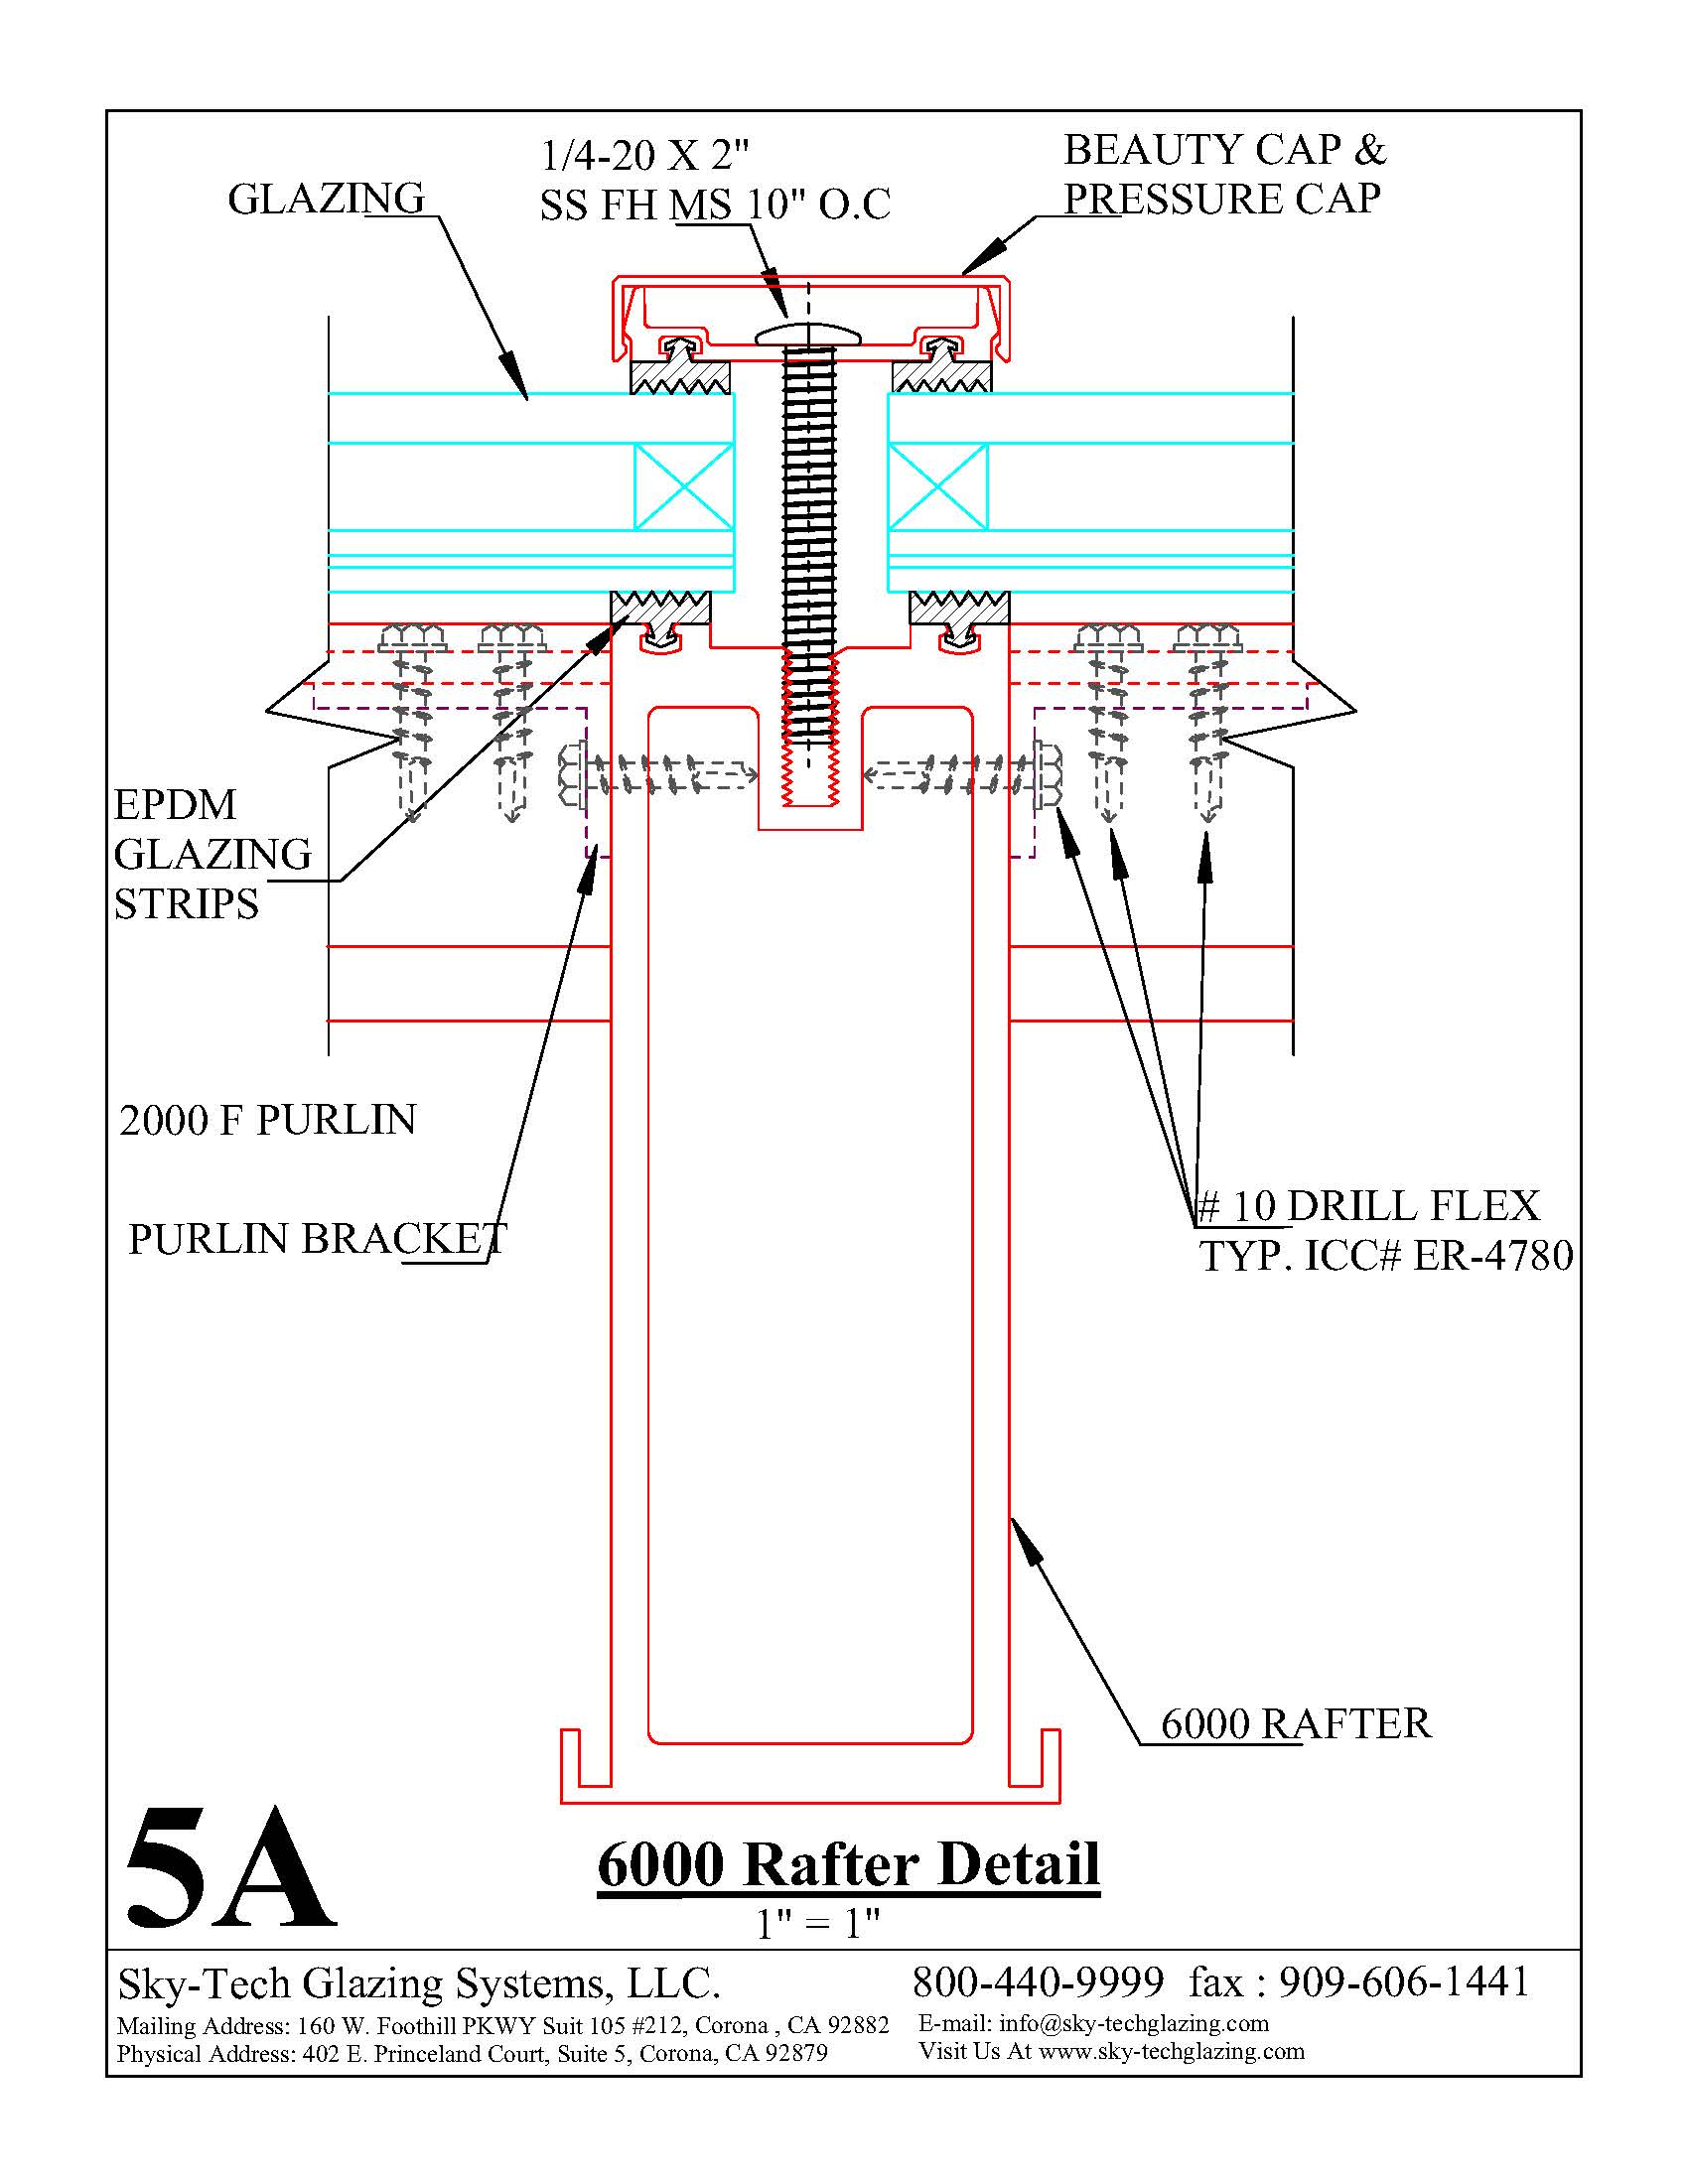 5A 6000 Rafter Detail